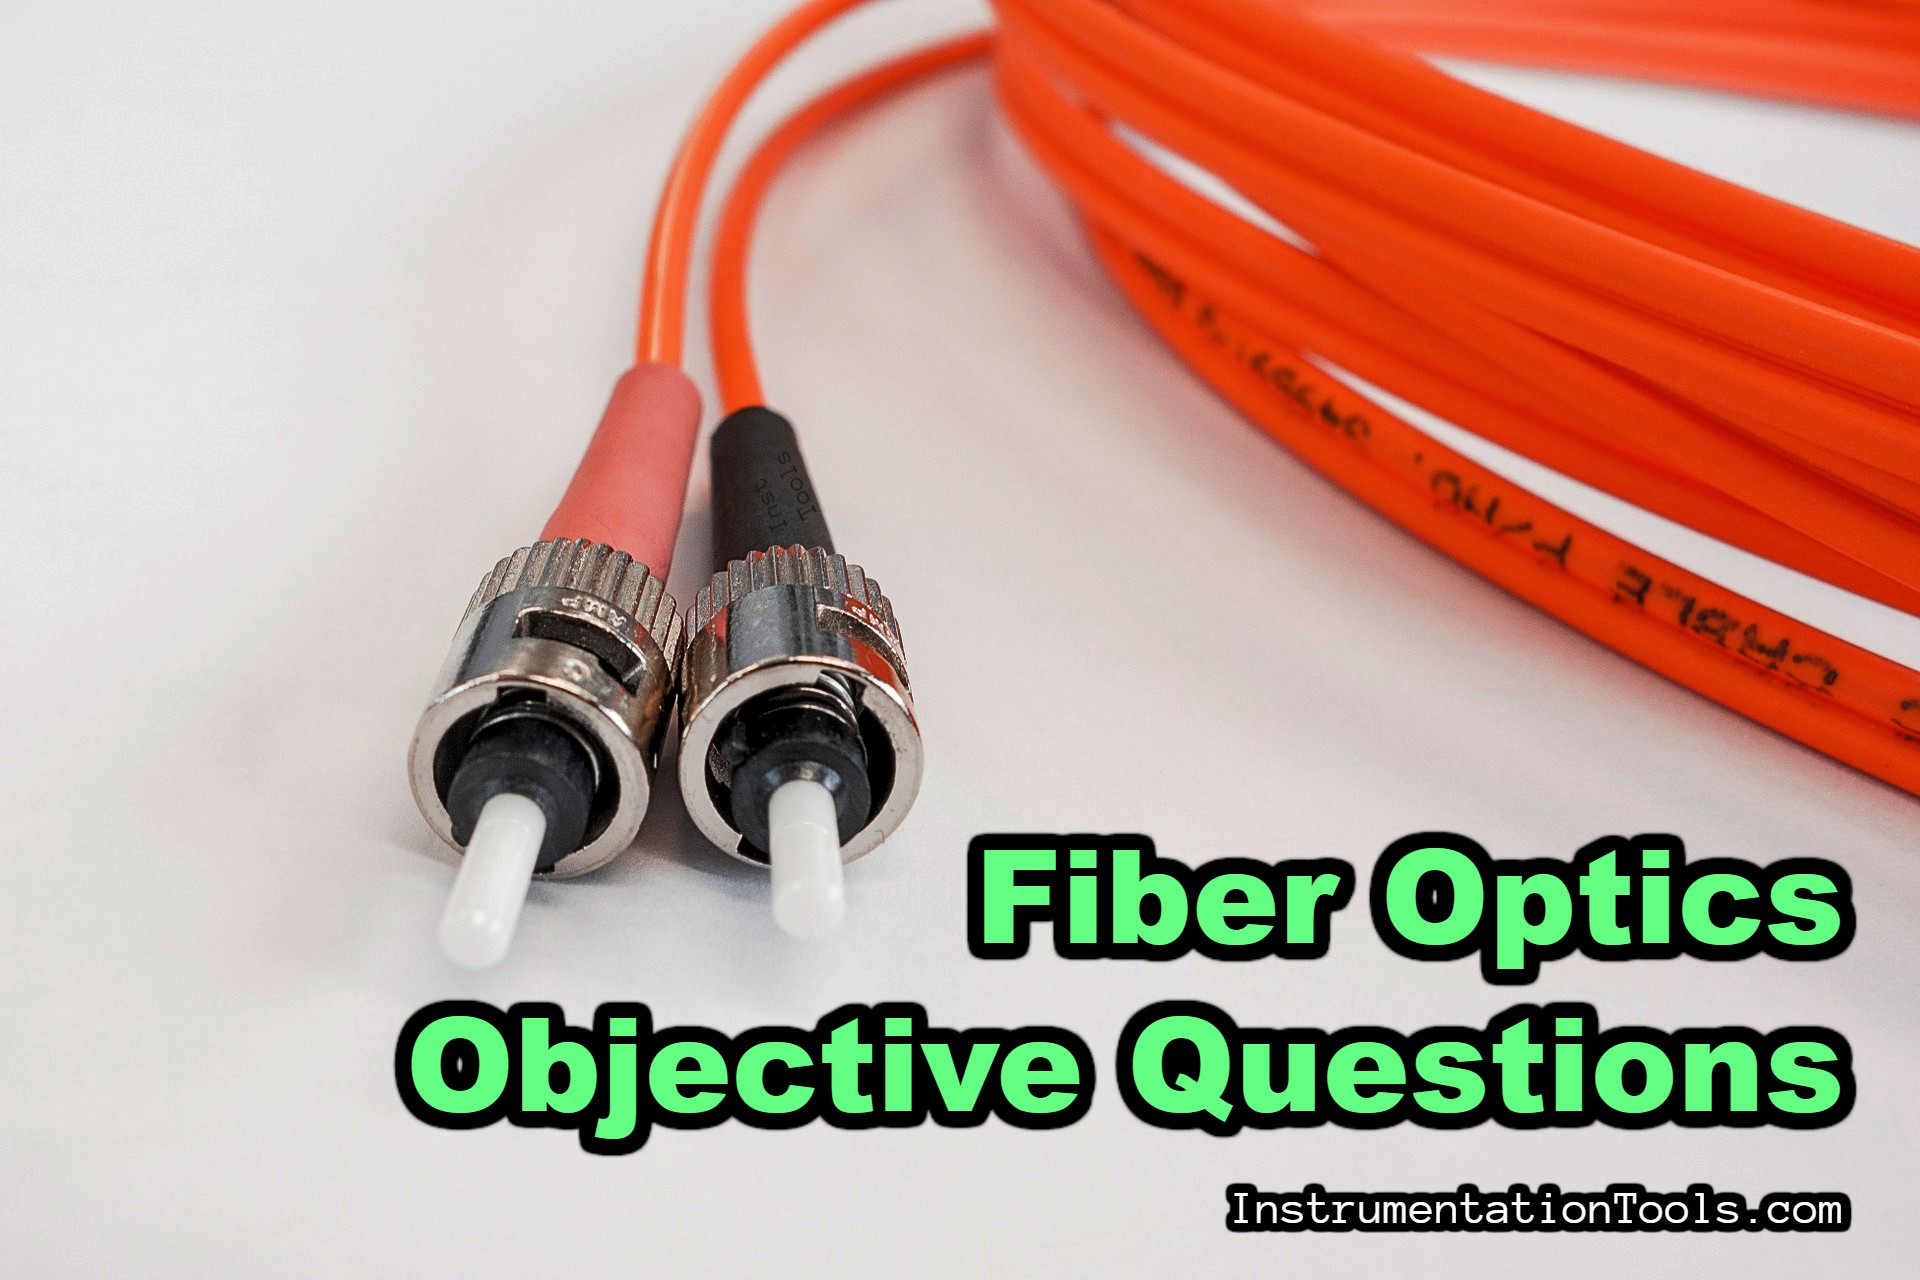 Fiber Optics Objective Questions and Answers